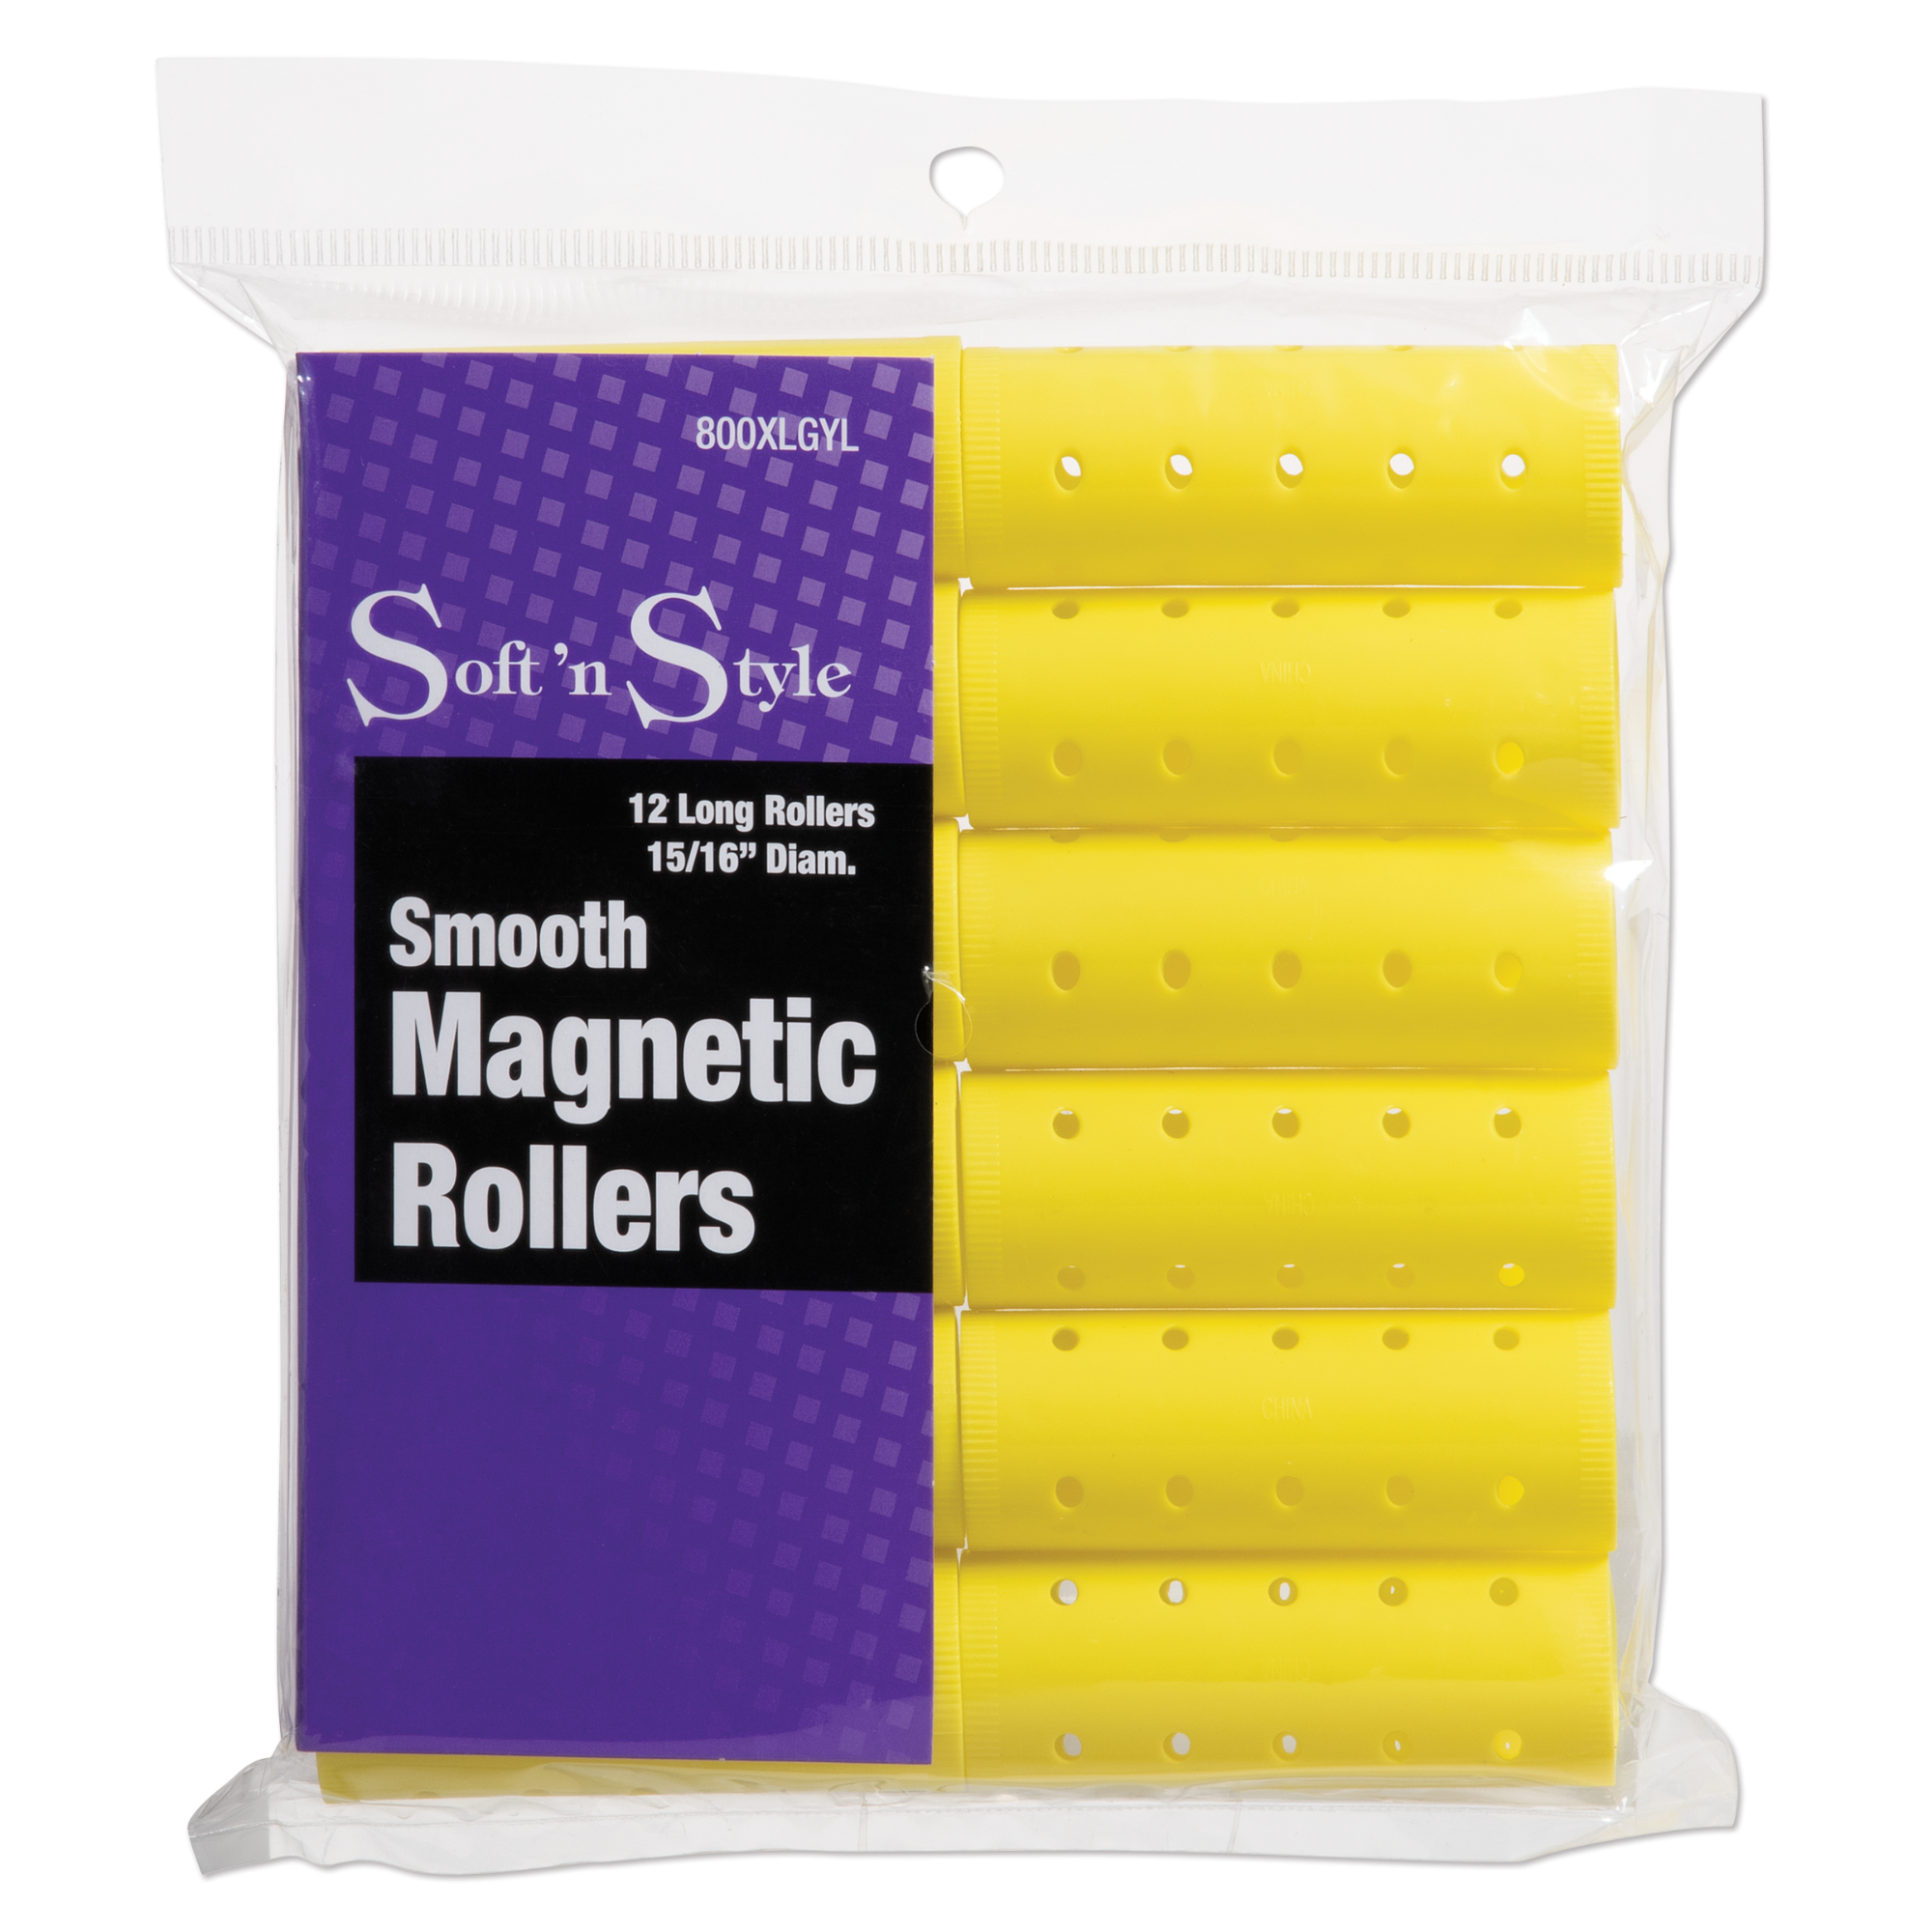 Smooth Magnetic Rollers, Long Yellow - 15/16"